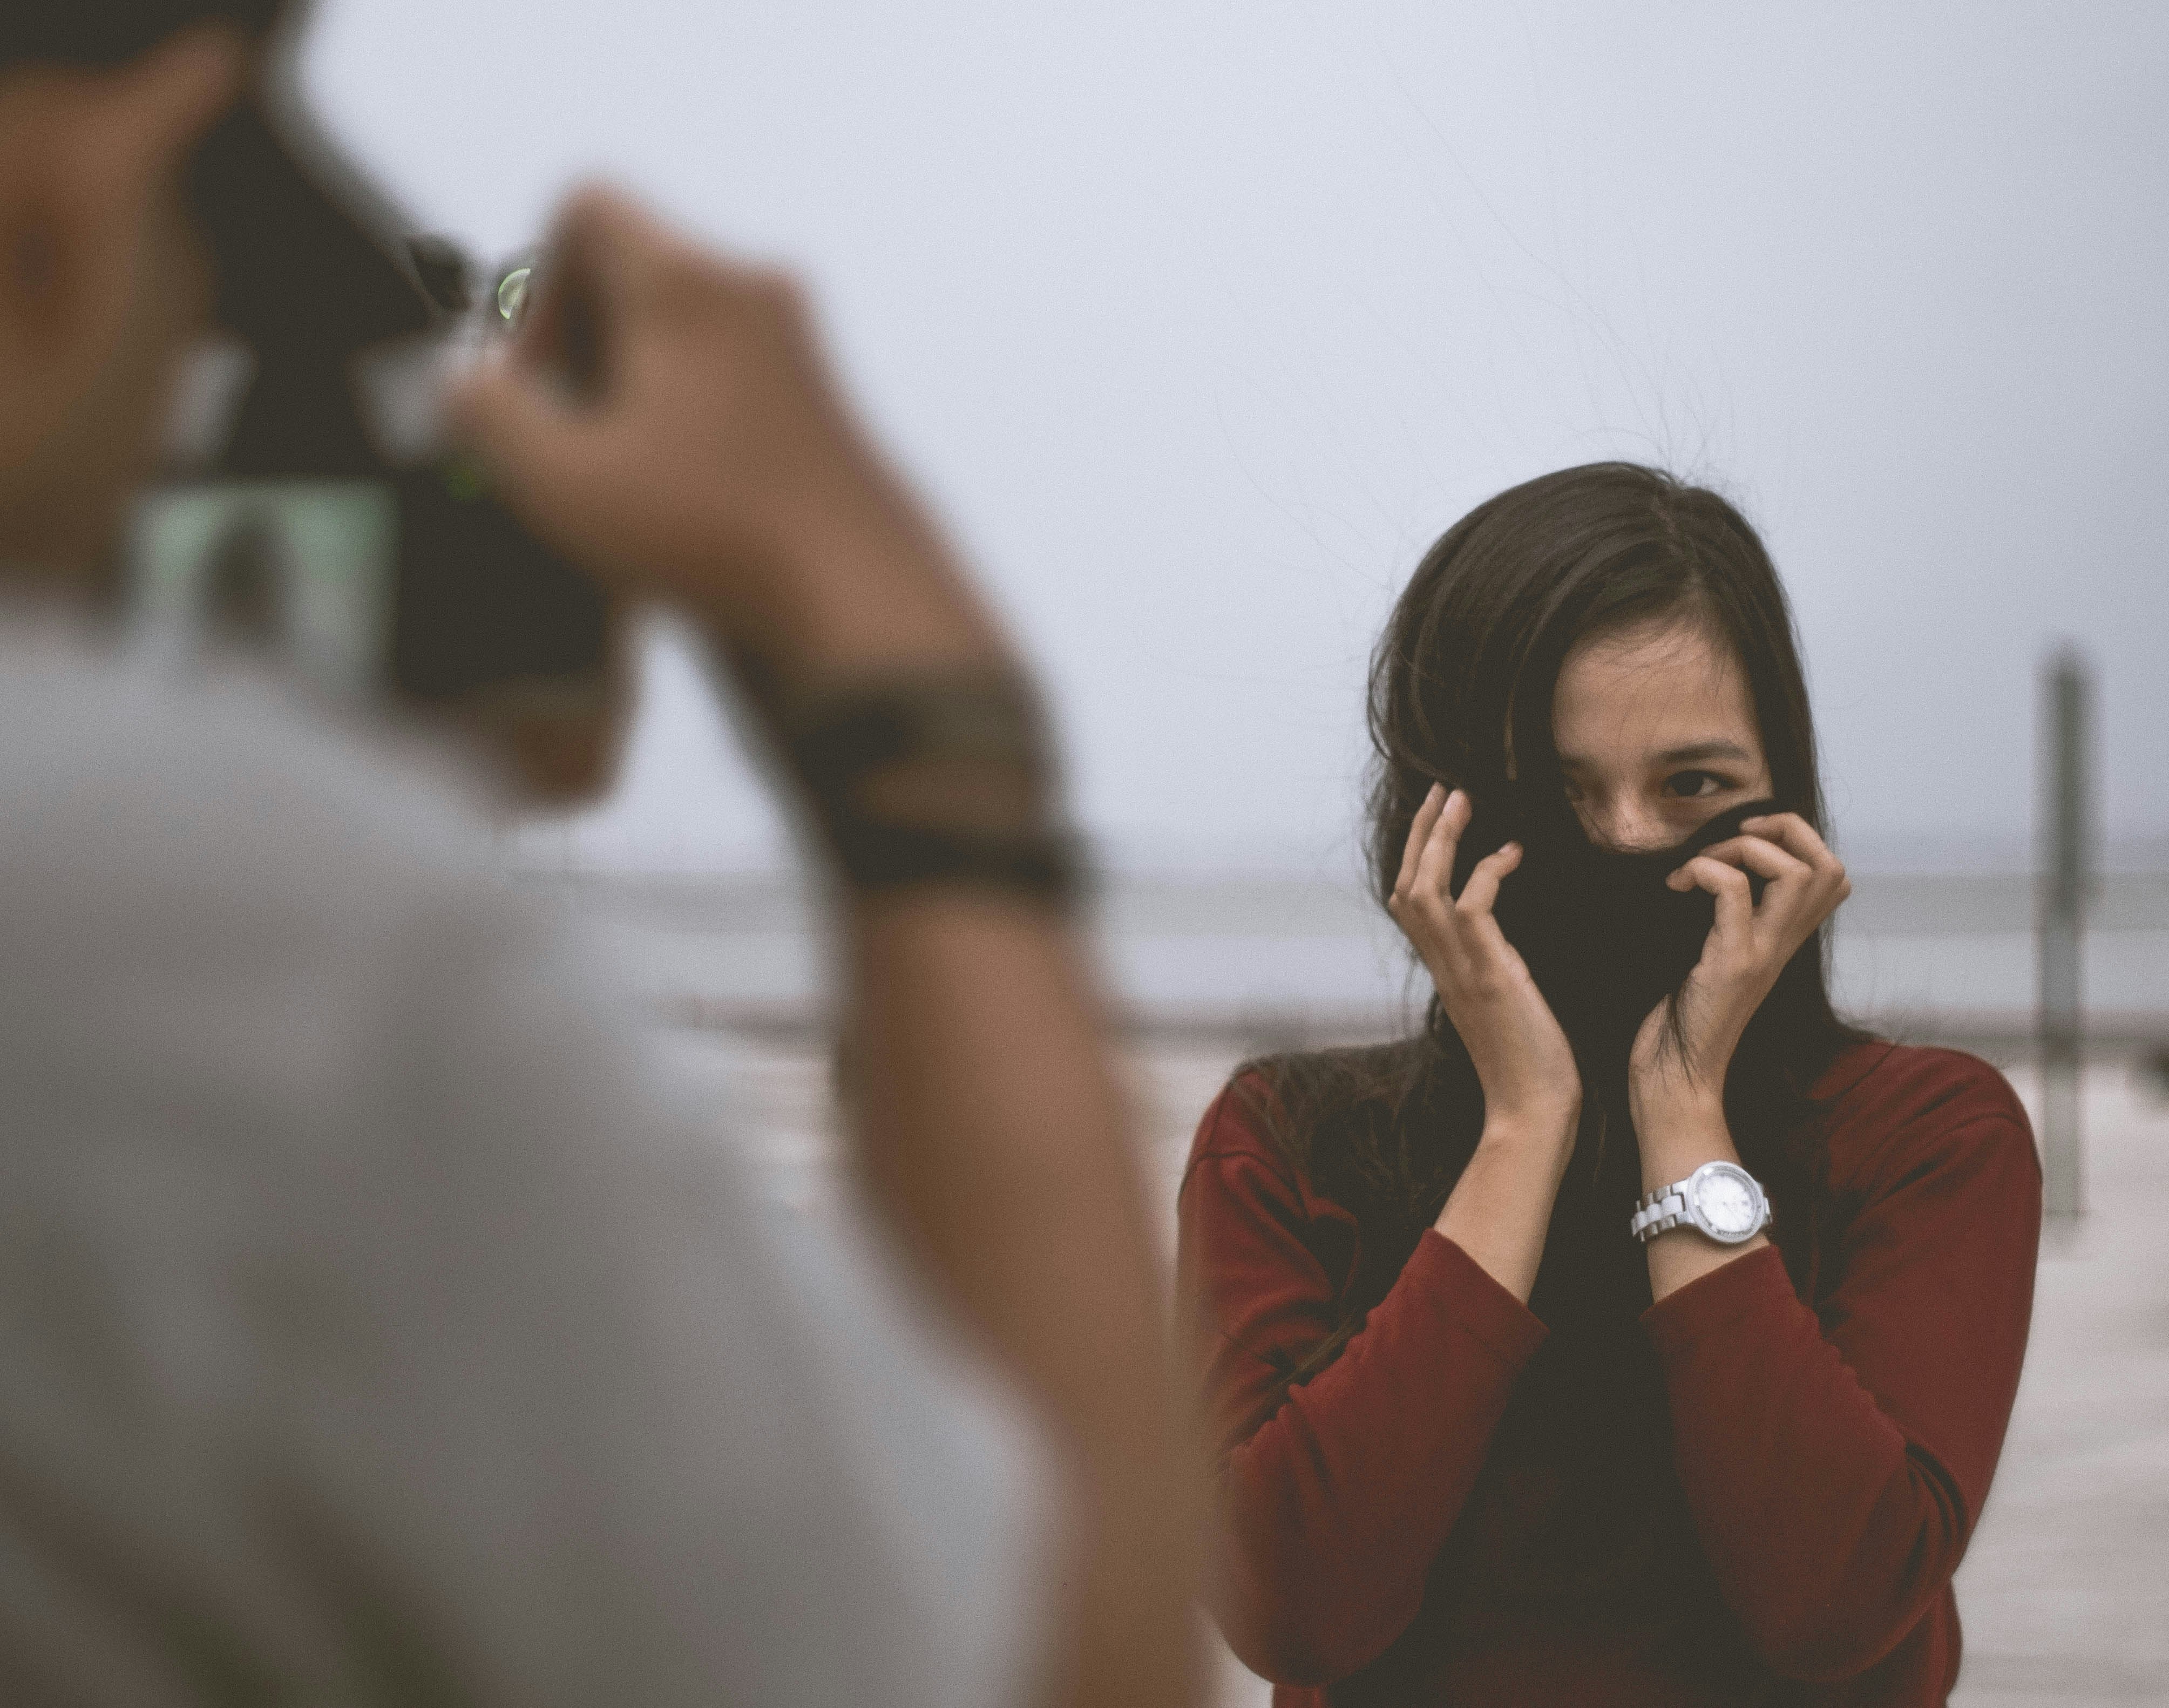 selective focus photography of person wearing white shirt taking photo of woman wearing red long-sleeved shirt covering her face with hair